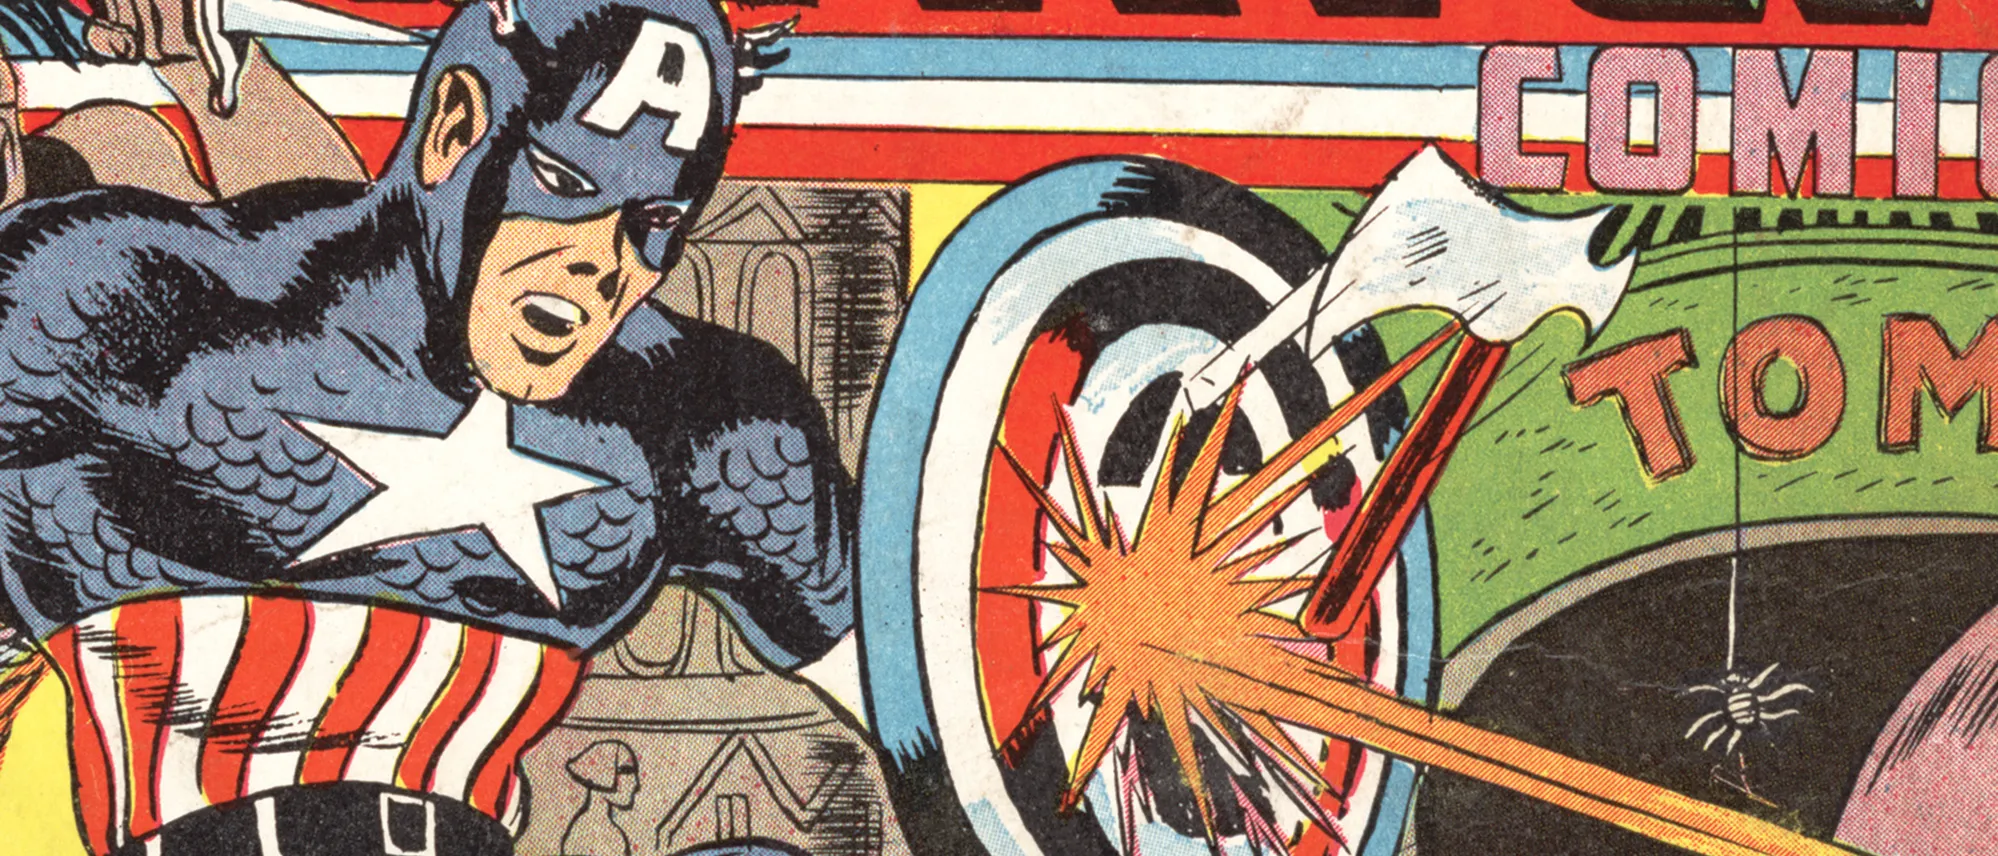 In a detail from a comic book cover: A hand-drawn Captain America, wearing a red, white and blue suit that covers the top half of his face to hide his identity, holds up his shield to block an attack that makes short rays blast in all directions.